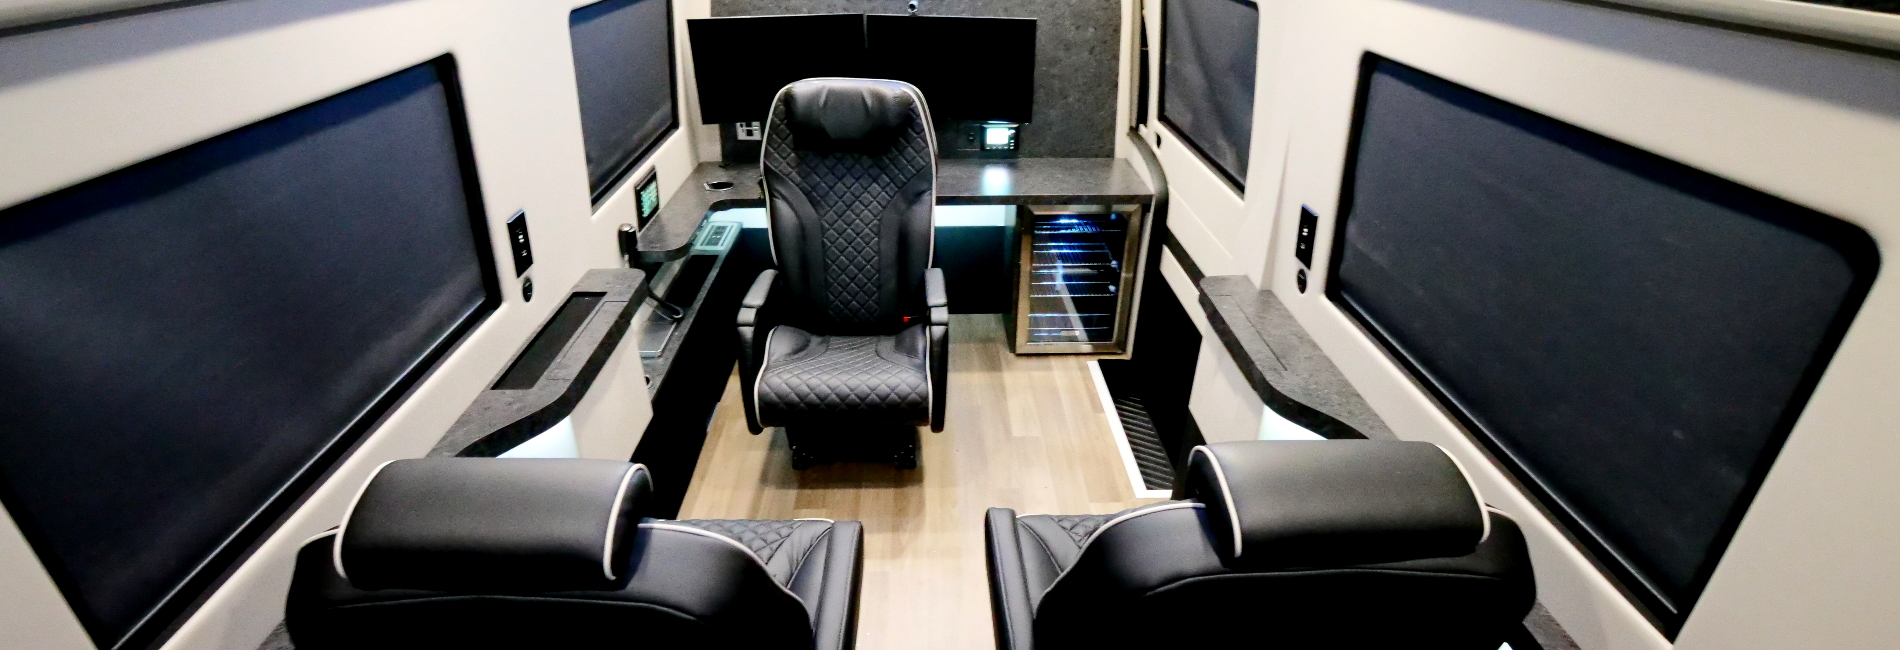 Executive mobile office featuring a multi-functional boardroom with a complete workstation, captain seating, and full electronic integration.